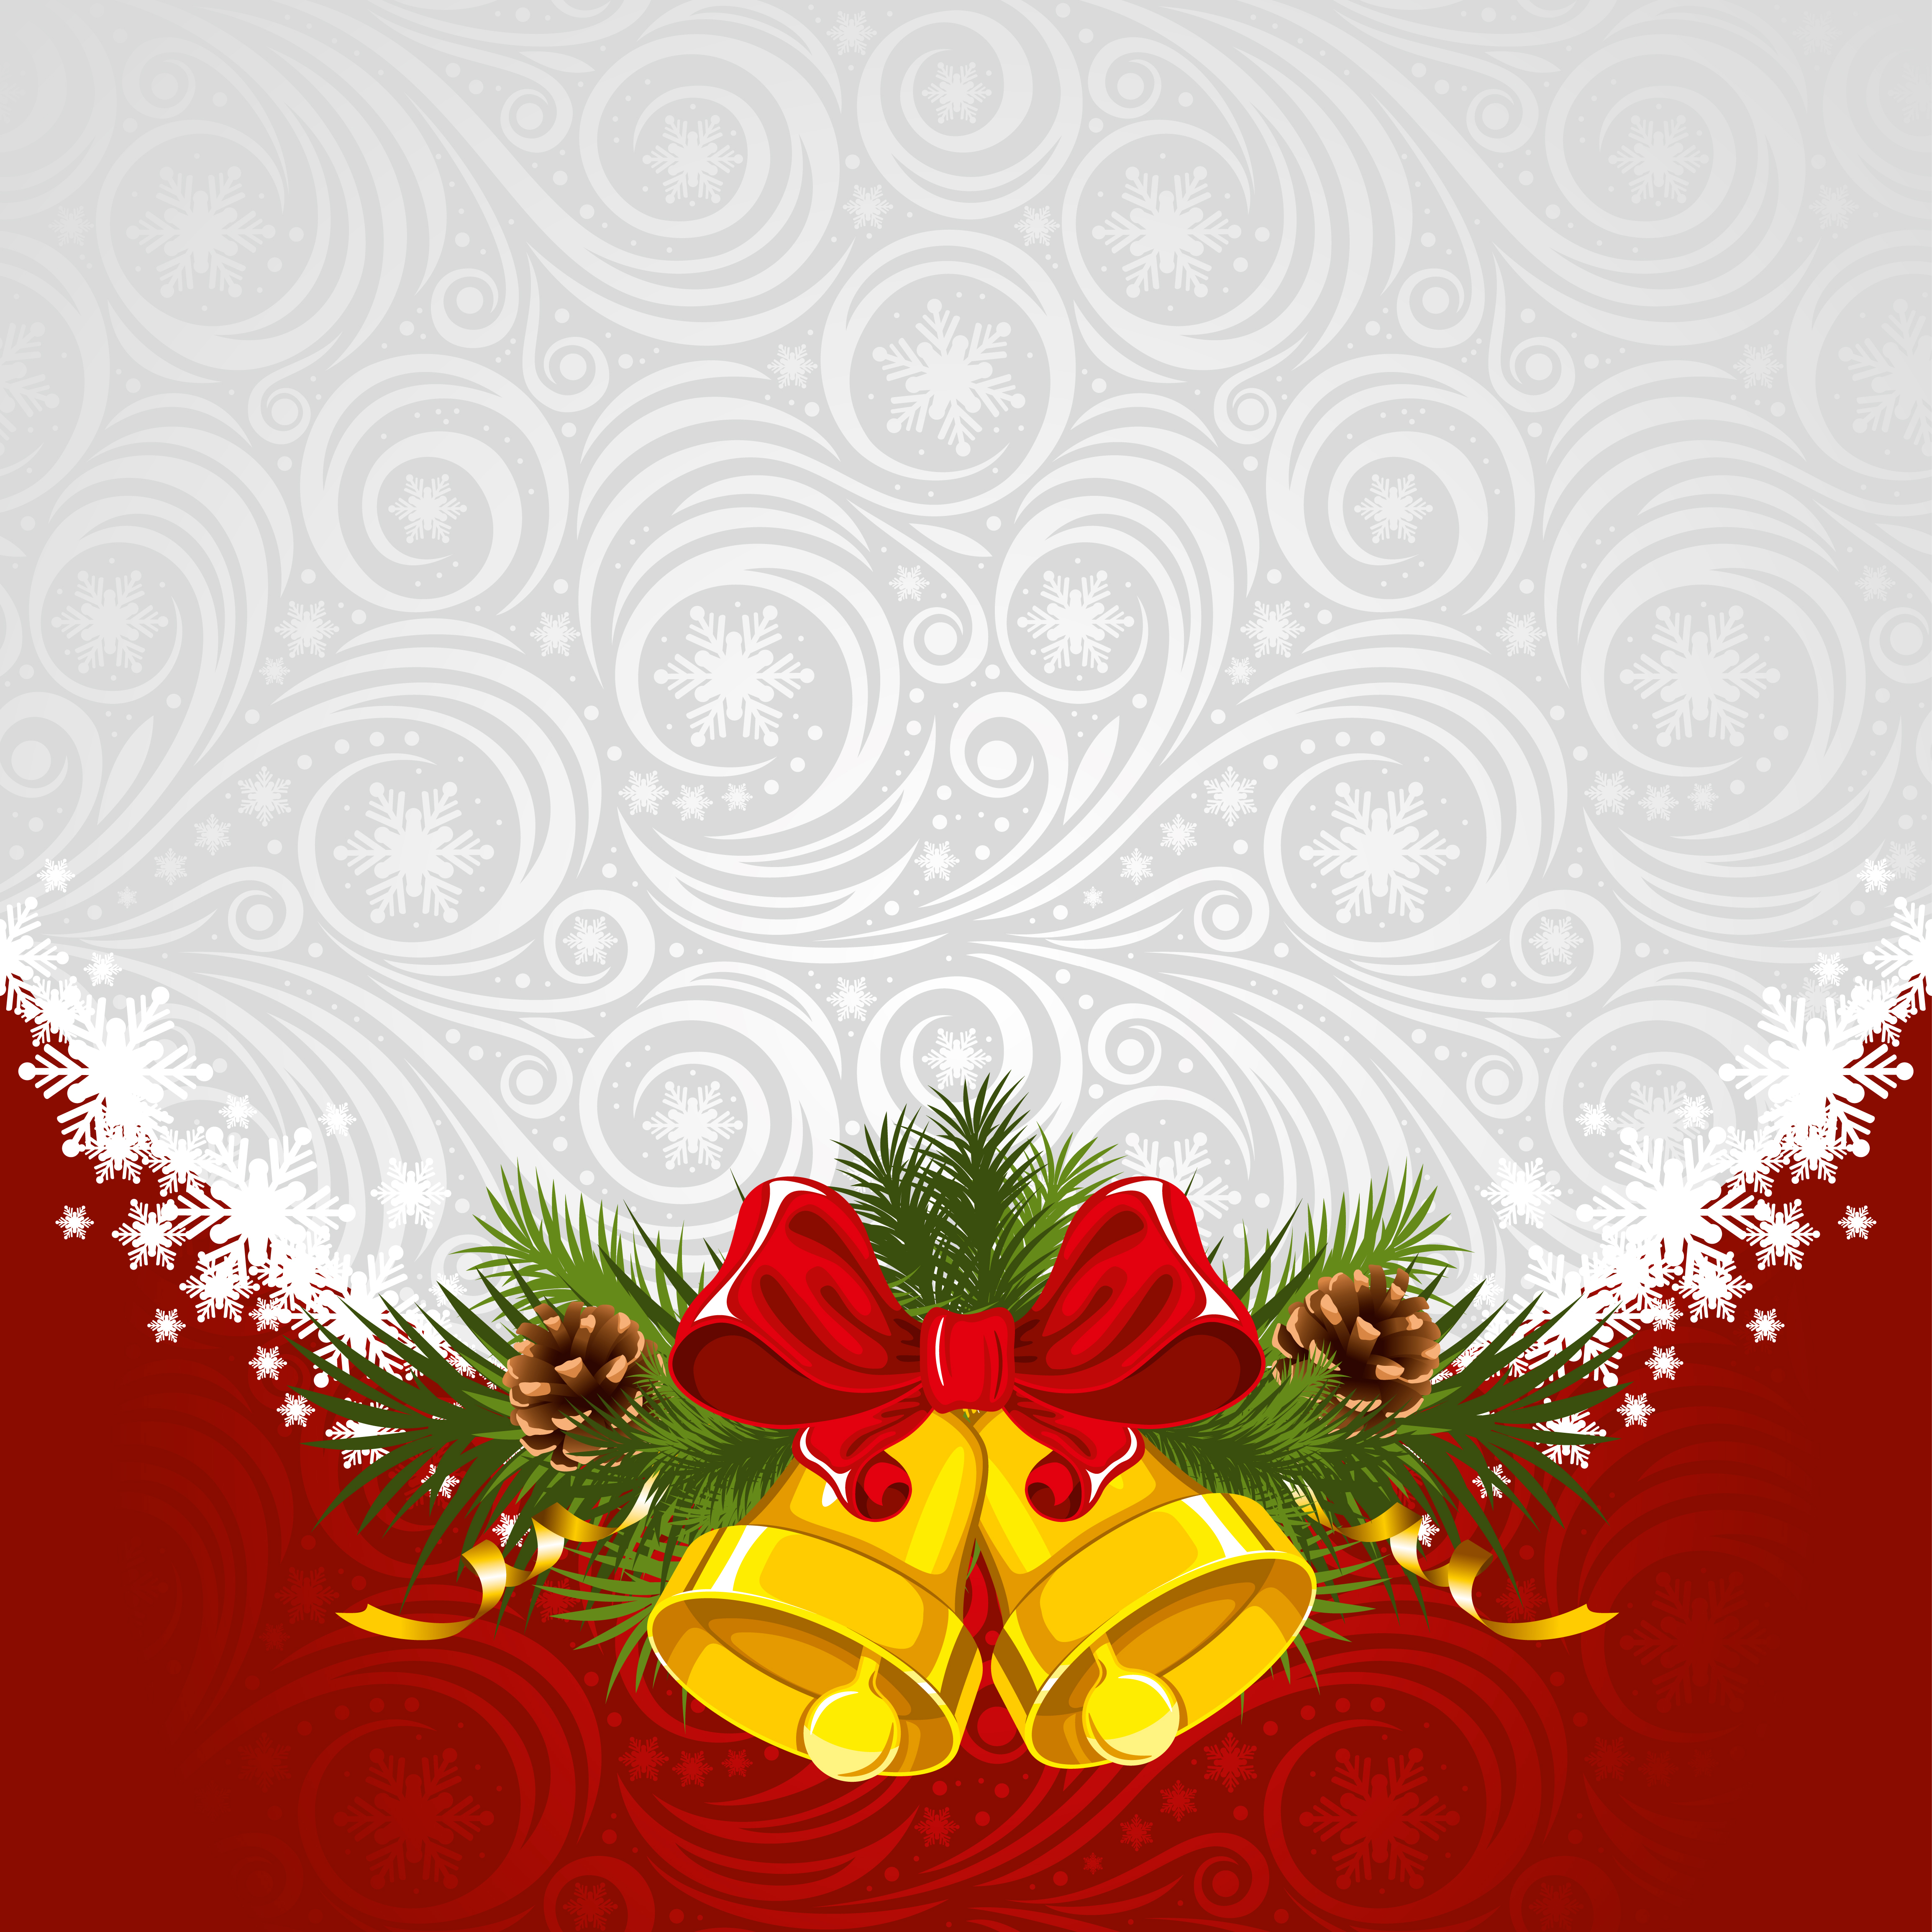 Christmas Backgrounds Free Downloads